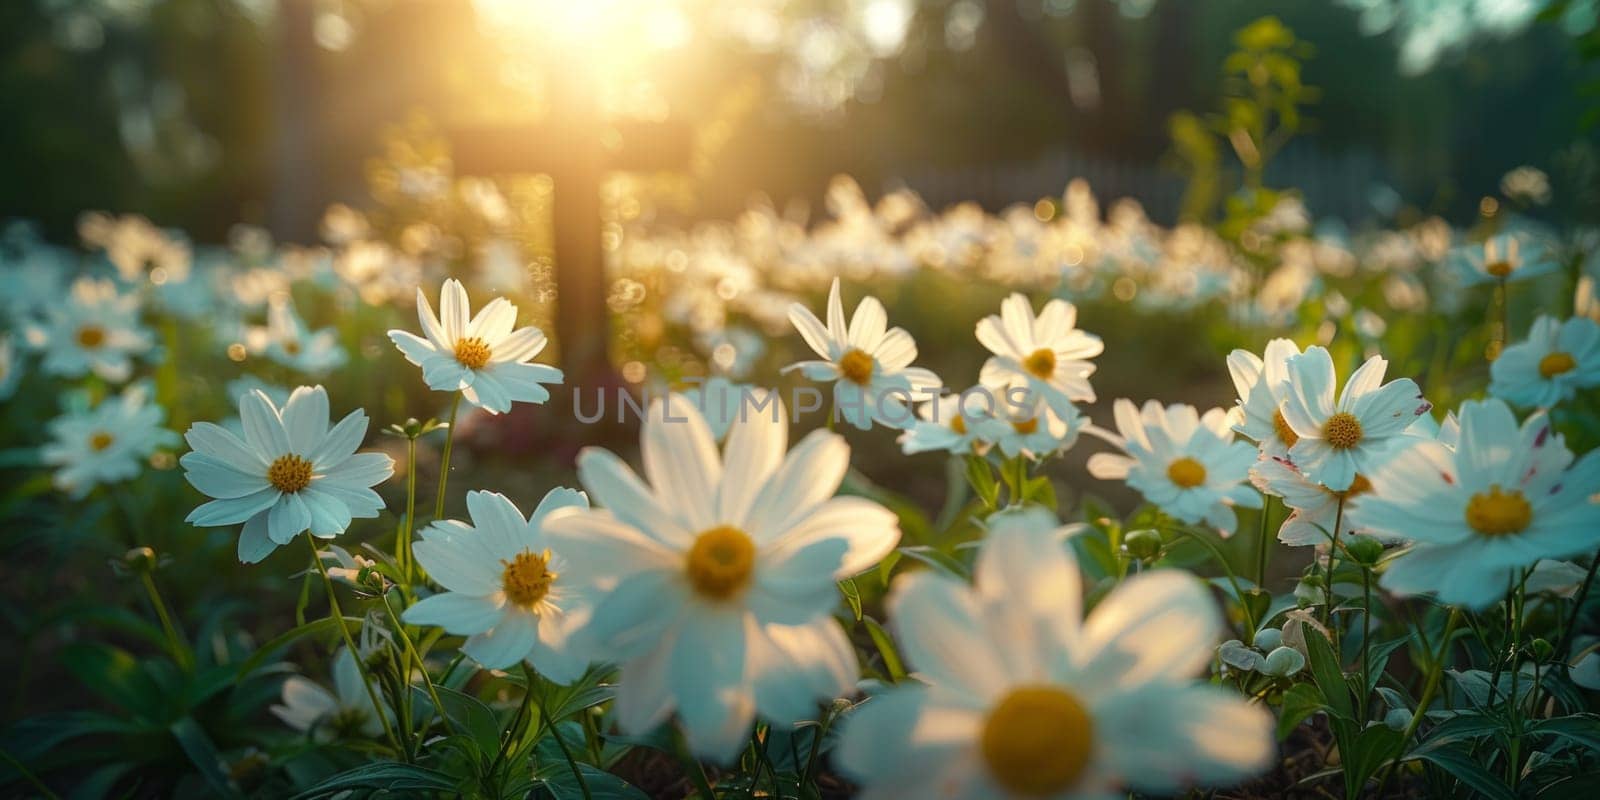 A field of blooming white daisies stretches out beneath the sun shining through the trees, creating a picturesque scene of nature in full bloom by but_photo